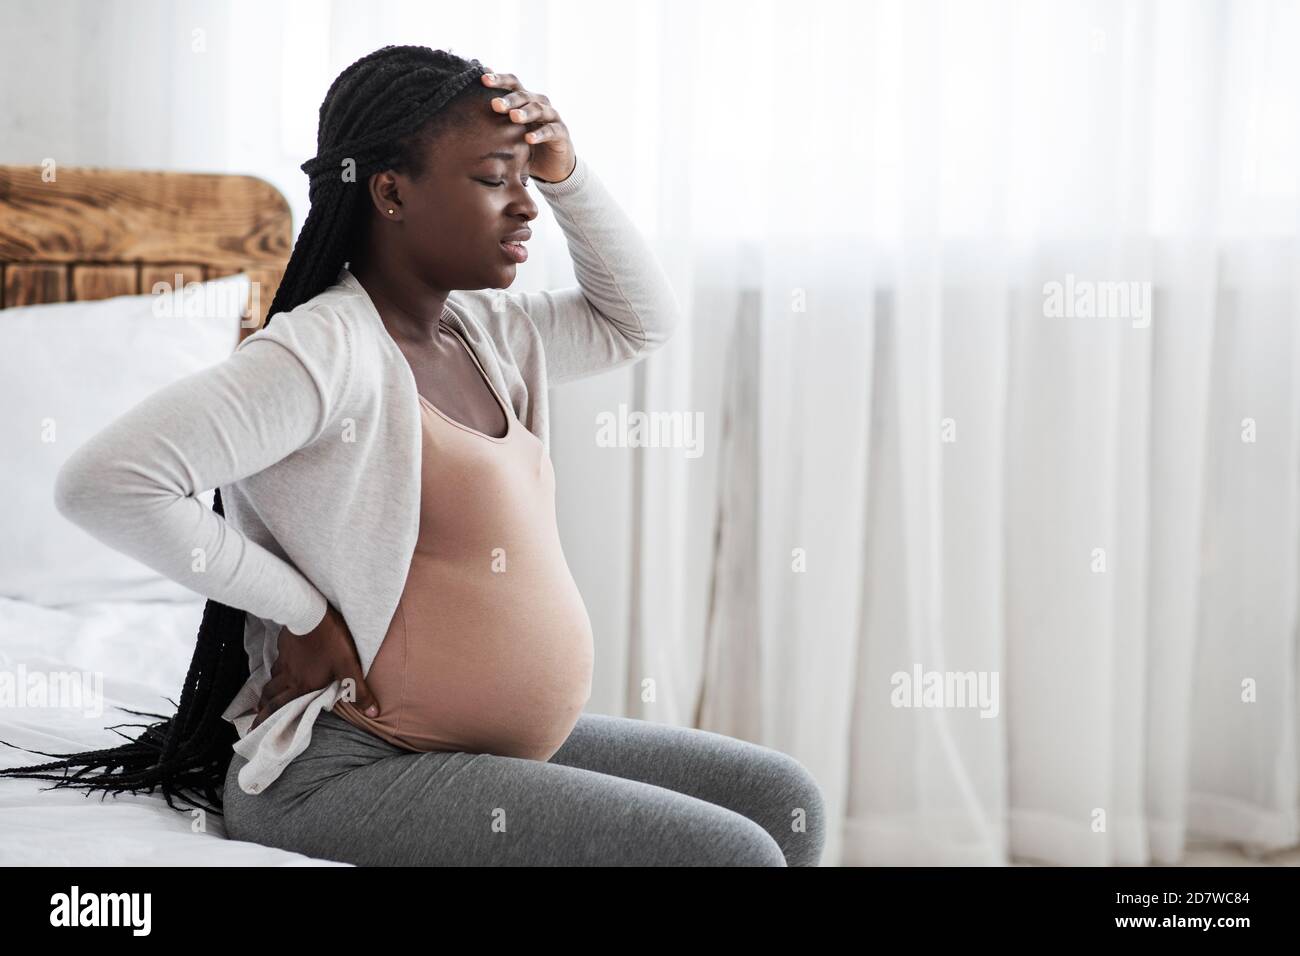 Sick African Pregnant Woman Feeling Unwell At Home, Sitting On Bed Stock Photo